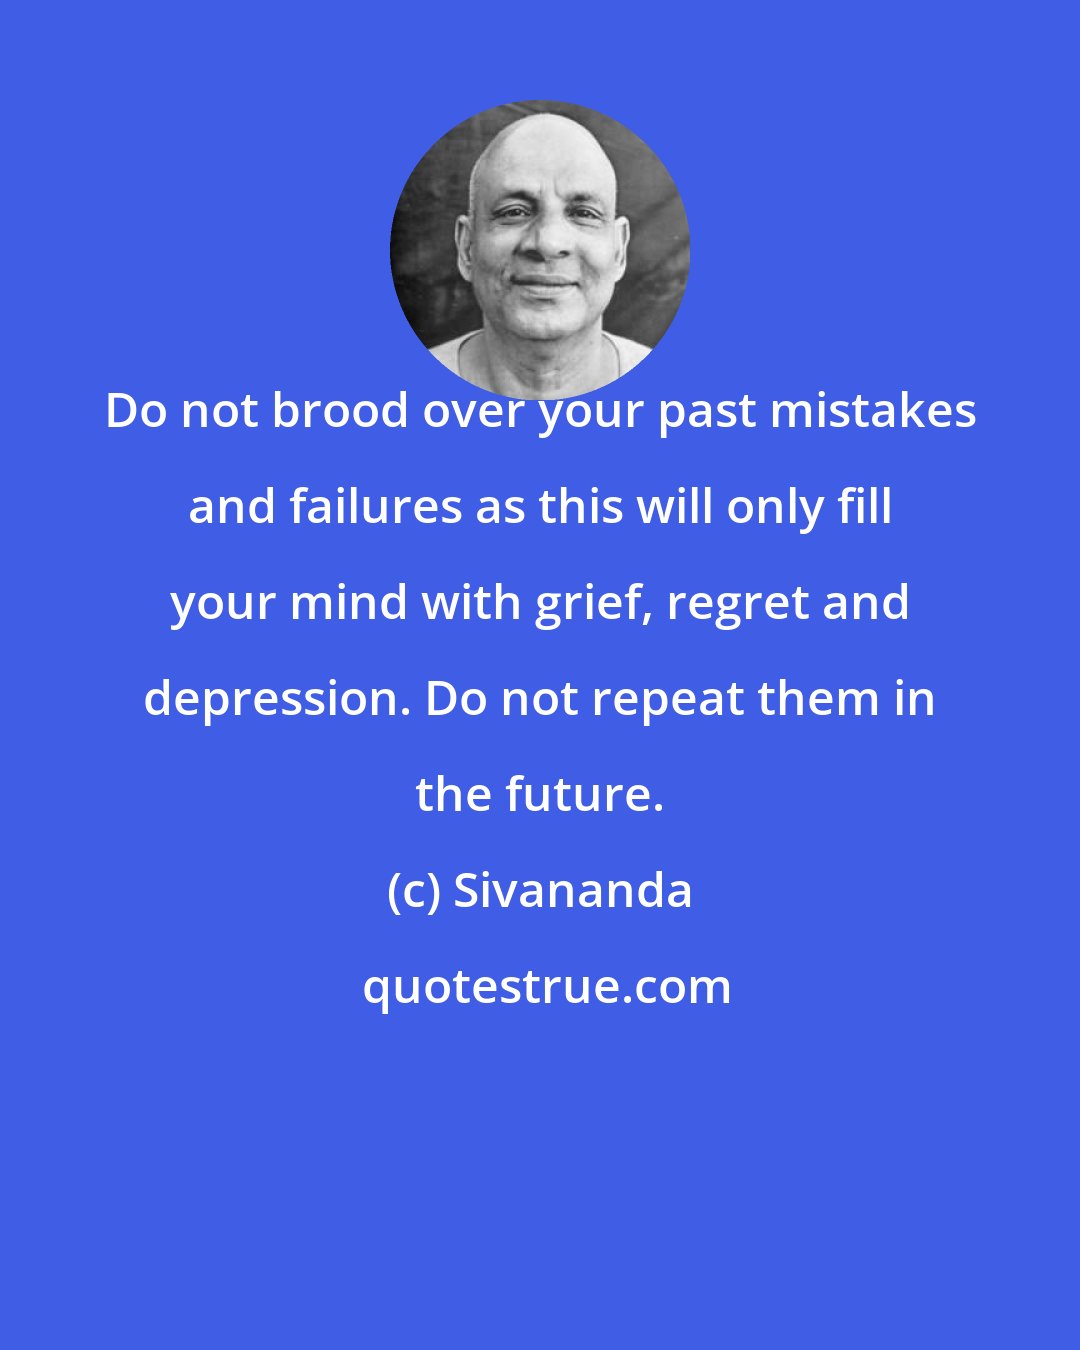 Sivananda: Do not brood over your past mistakes and failures as this will only fill your mind with grief, regret and depression. Do not repeat them in the future.